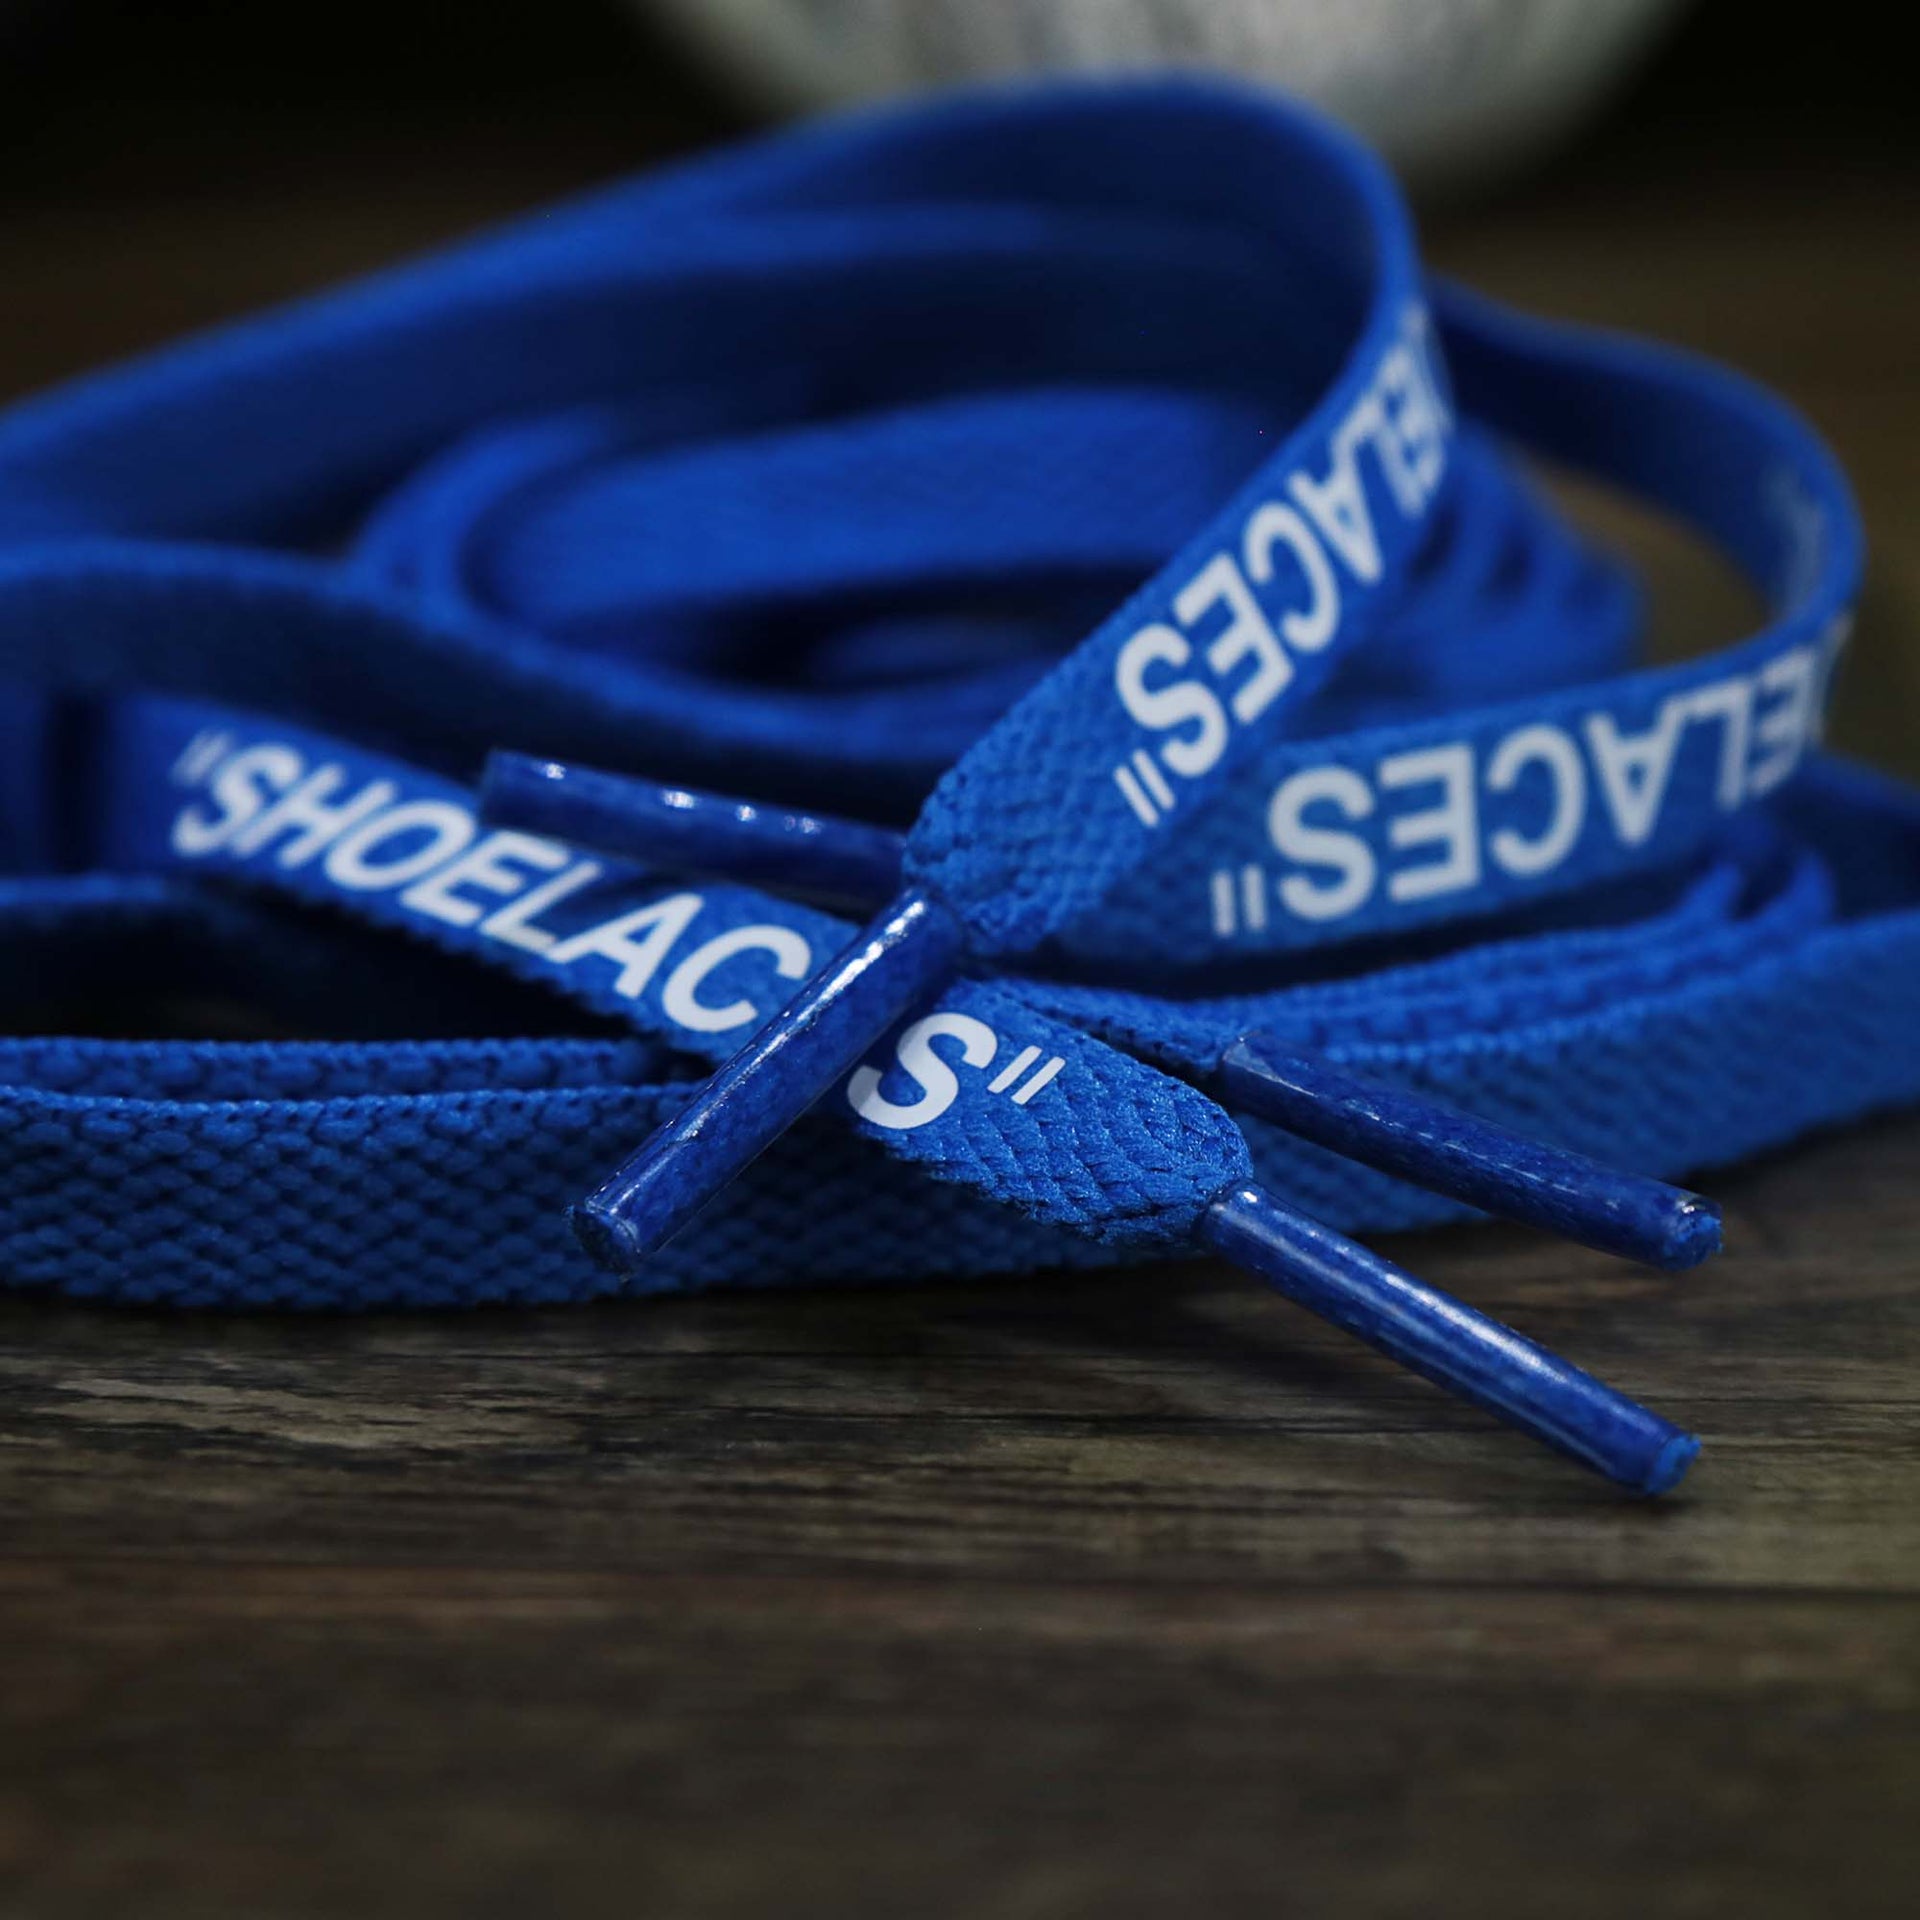 The aglets on the Flat Blue Shoelaces with “Shoelaces” Print | 120cm Capswag